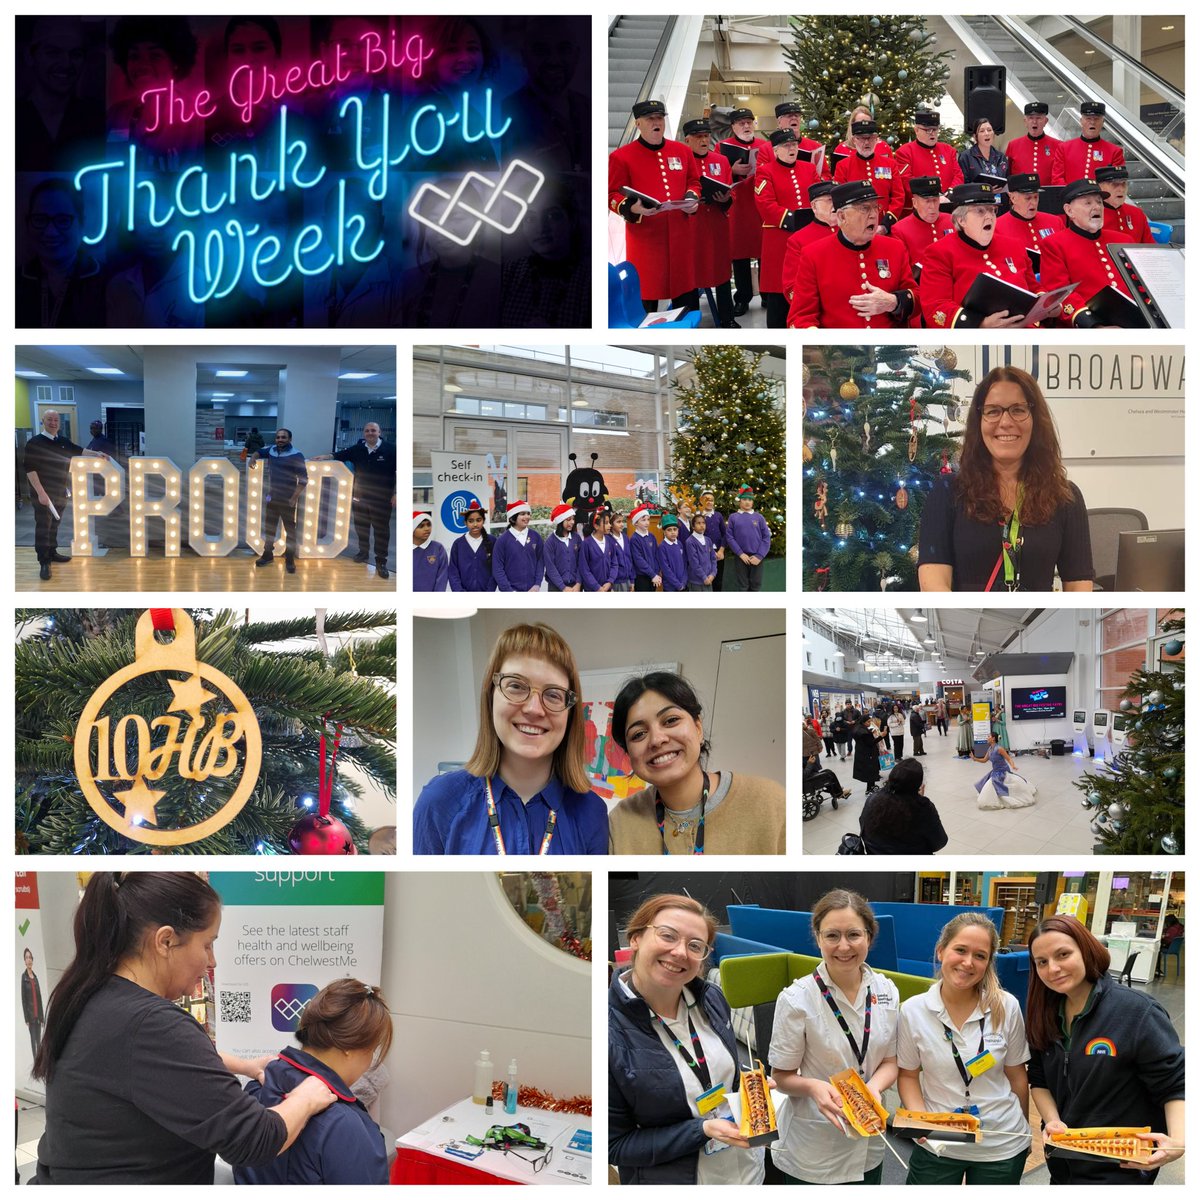 What a busy week we have had thanking all of our #NHS #staff @ChelwestFT @WestMidHospital @10HBHealth @56deanstreet #TheGreatBigThankYouWeek 💙 #wellbeing #wellness #Christmas @cwpluscharity